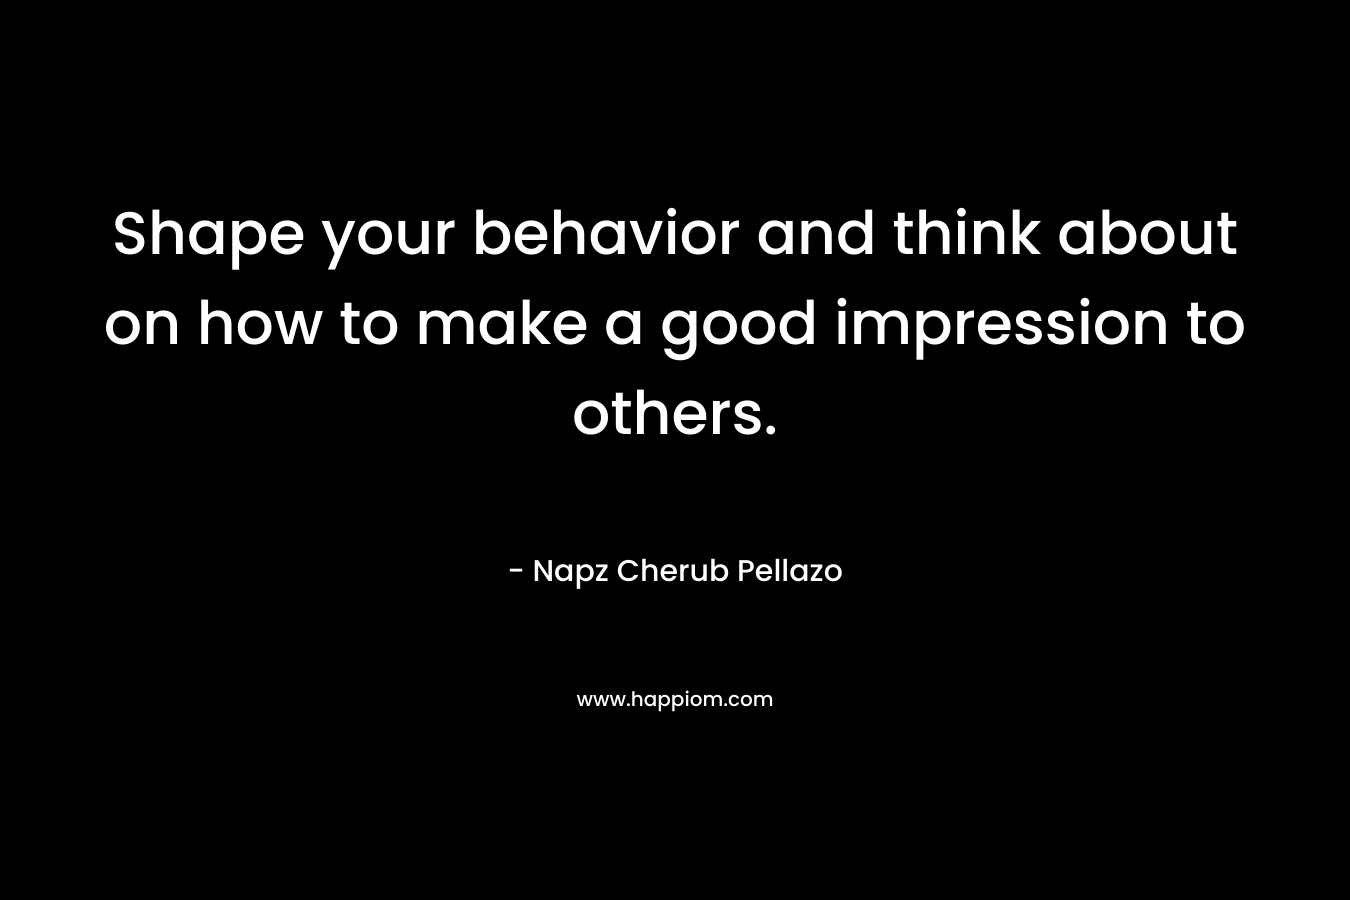 Shape your behavior and think about on how to make a good impression to others. – Napz Cherub Pellazo